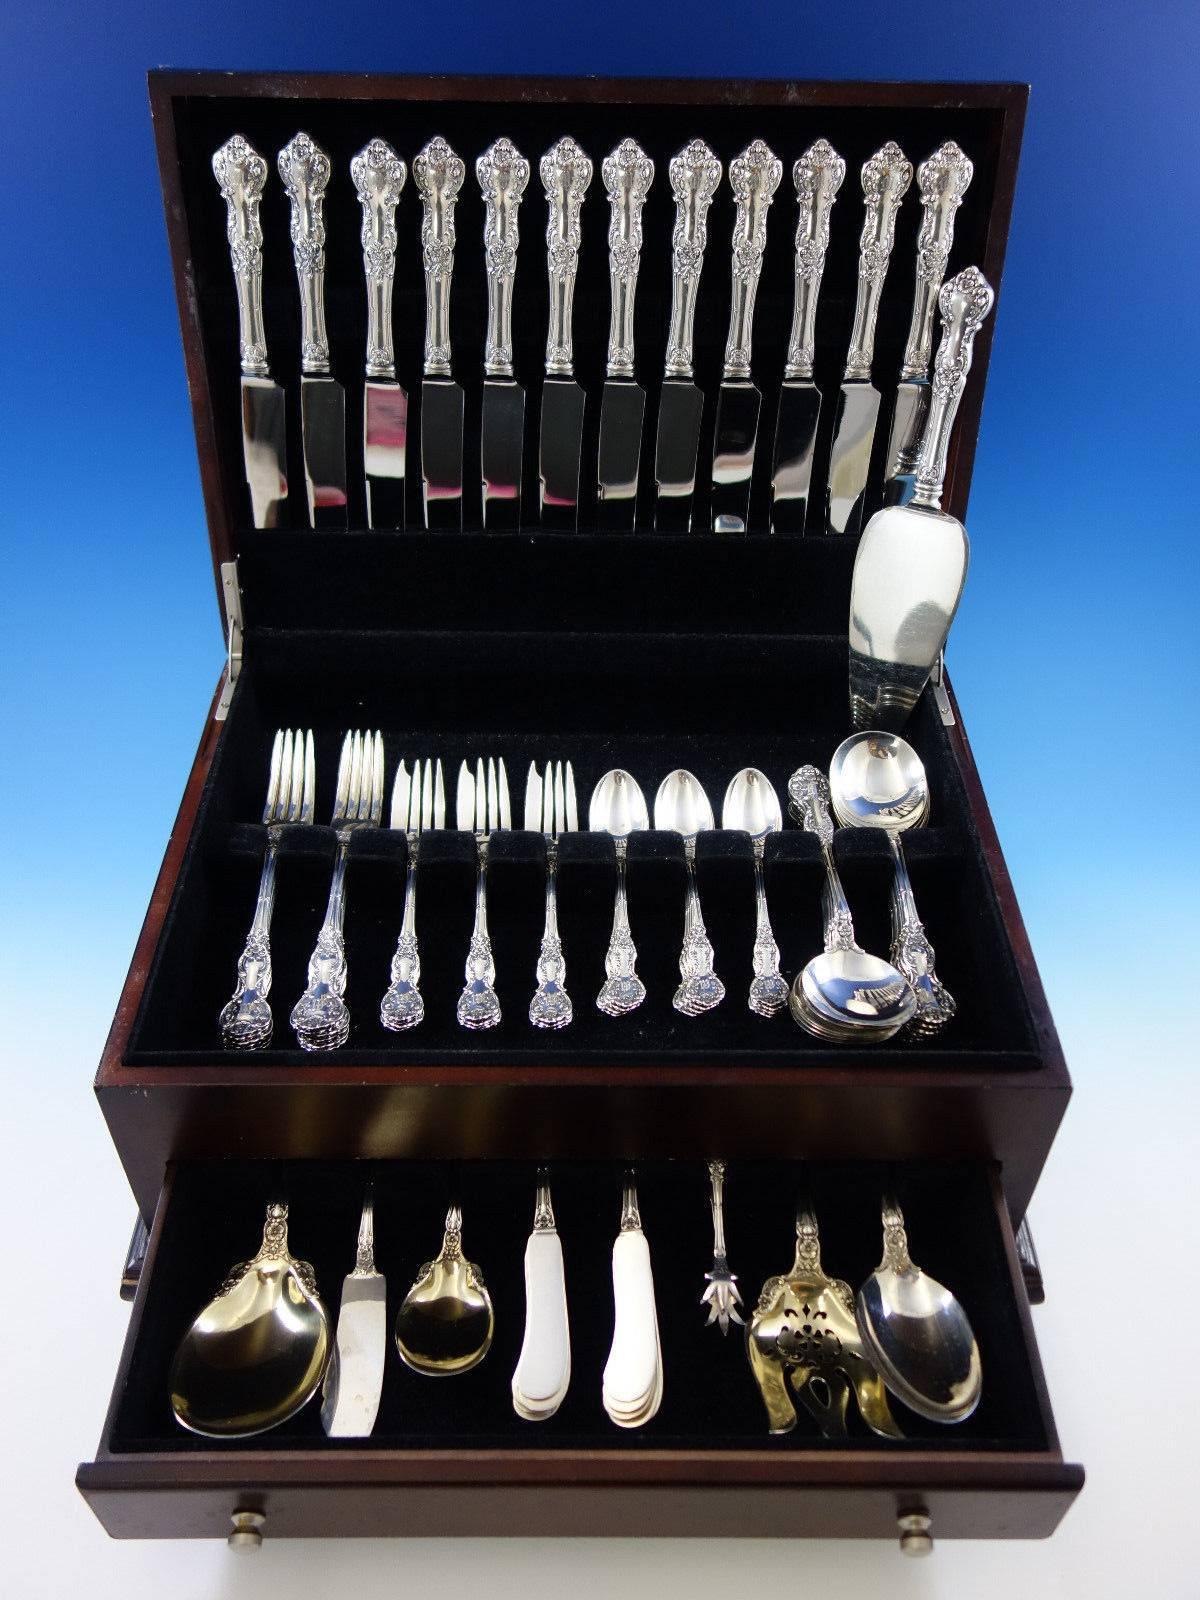 Fleury by Gorham sterling silver flatware set of 79 pieces. This set includes: 12 dinner knives, 9 1/2